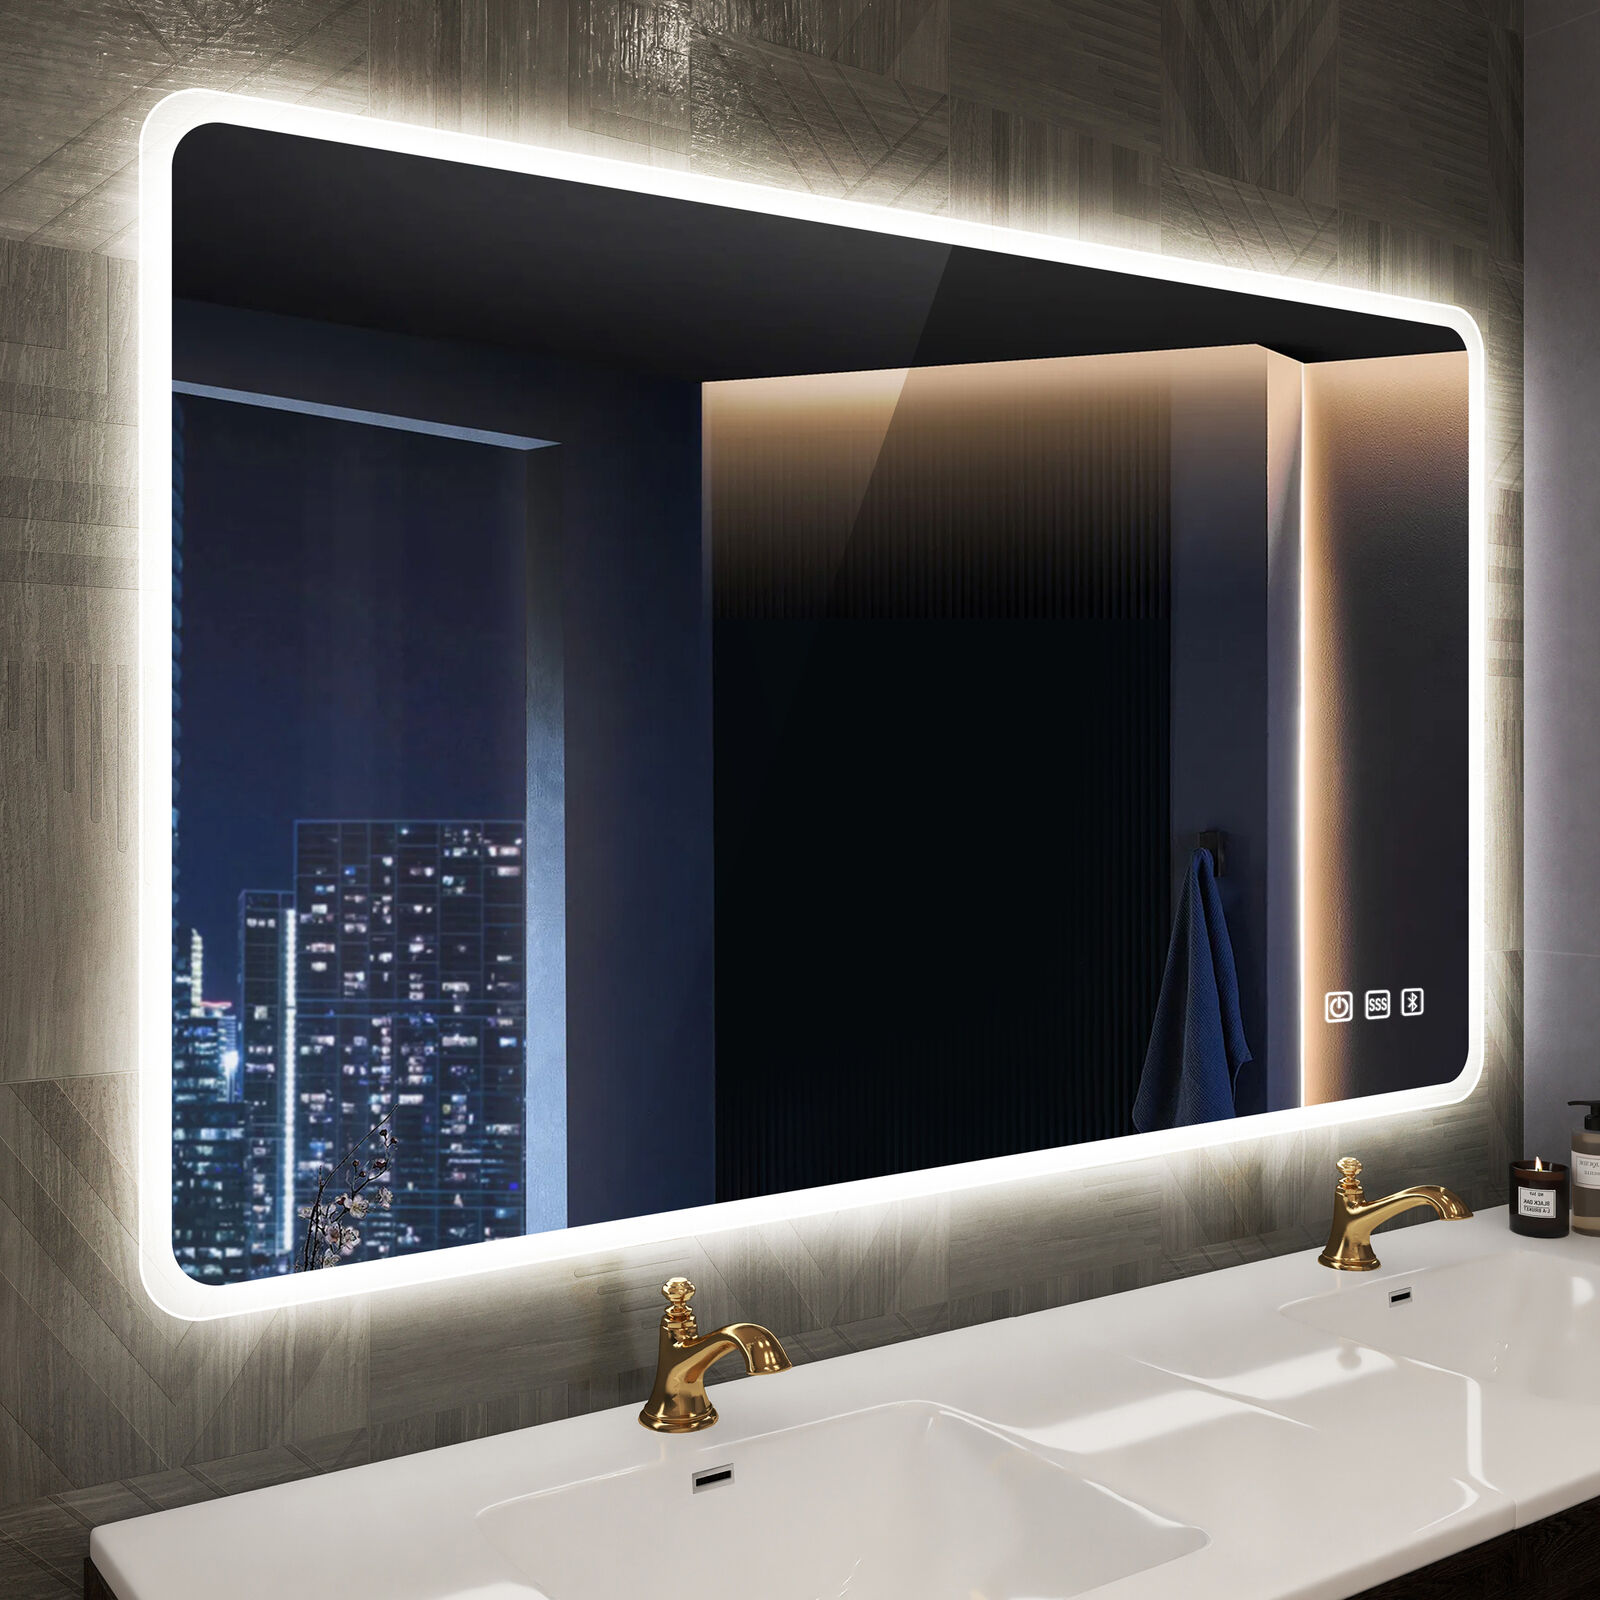 Sophisticated 28*40 Bathroom LED Mirror Bluetooth Dimming 3 Color lights for Men